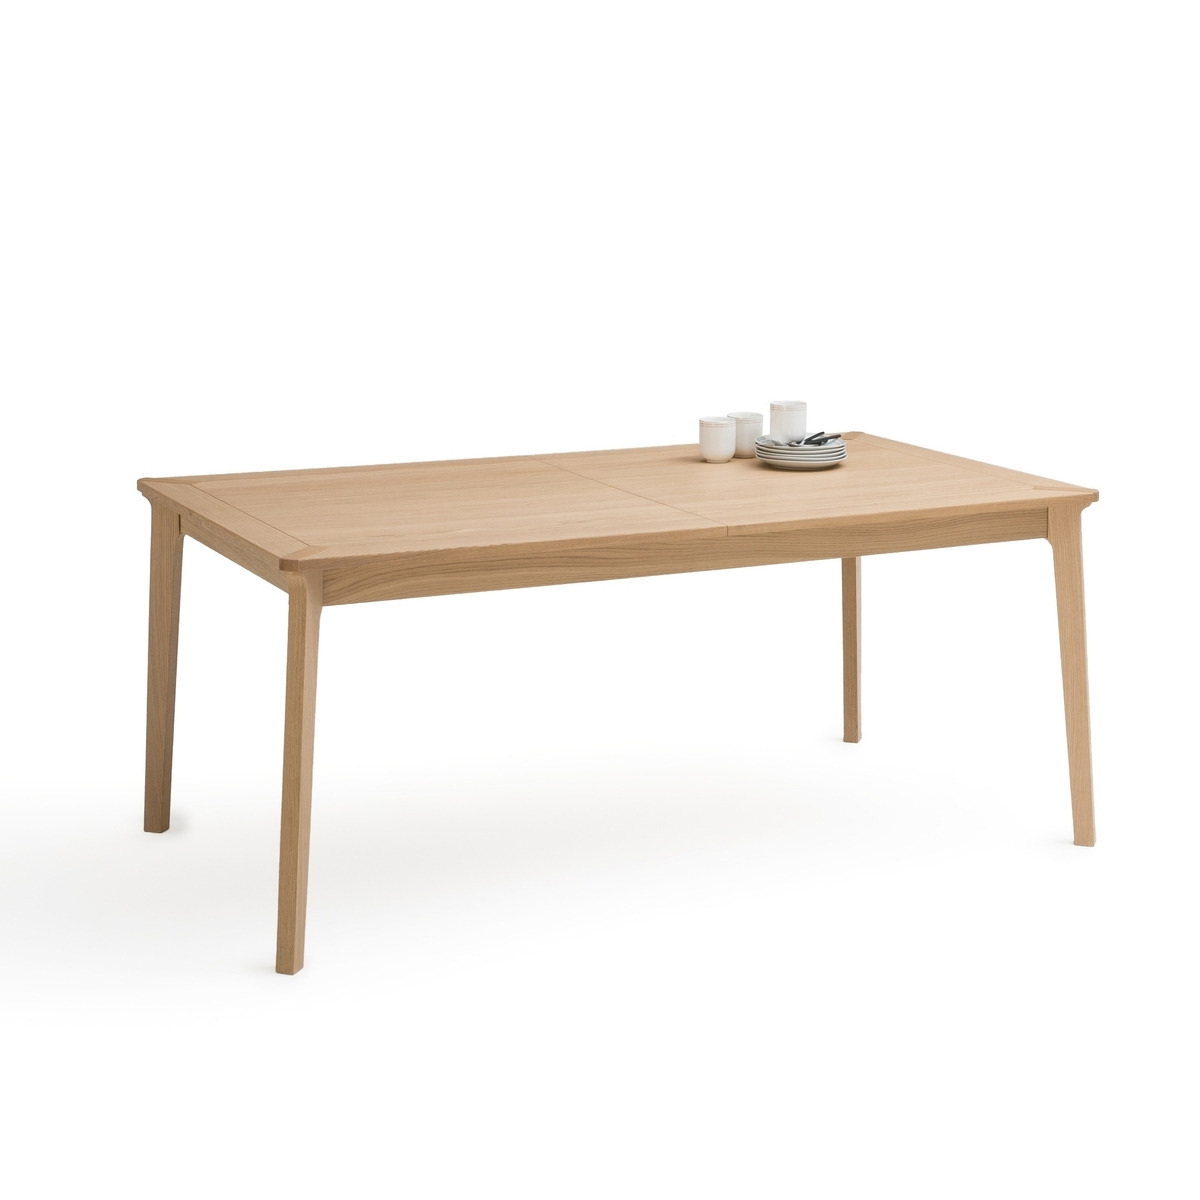 Pully Extendable Oak Veneer Dining Table (Seats 6-10) - image 1